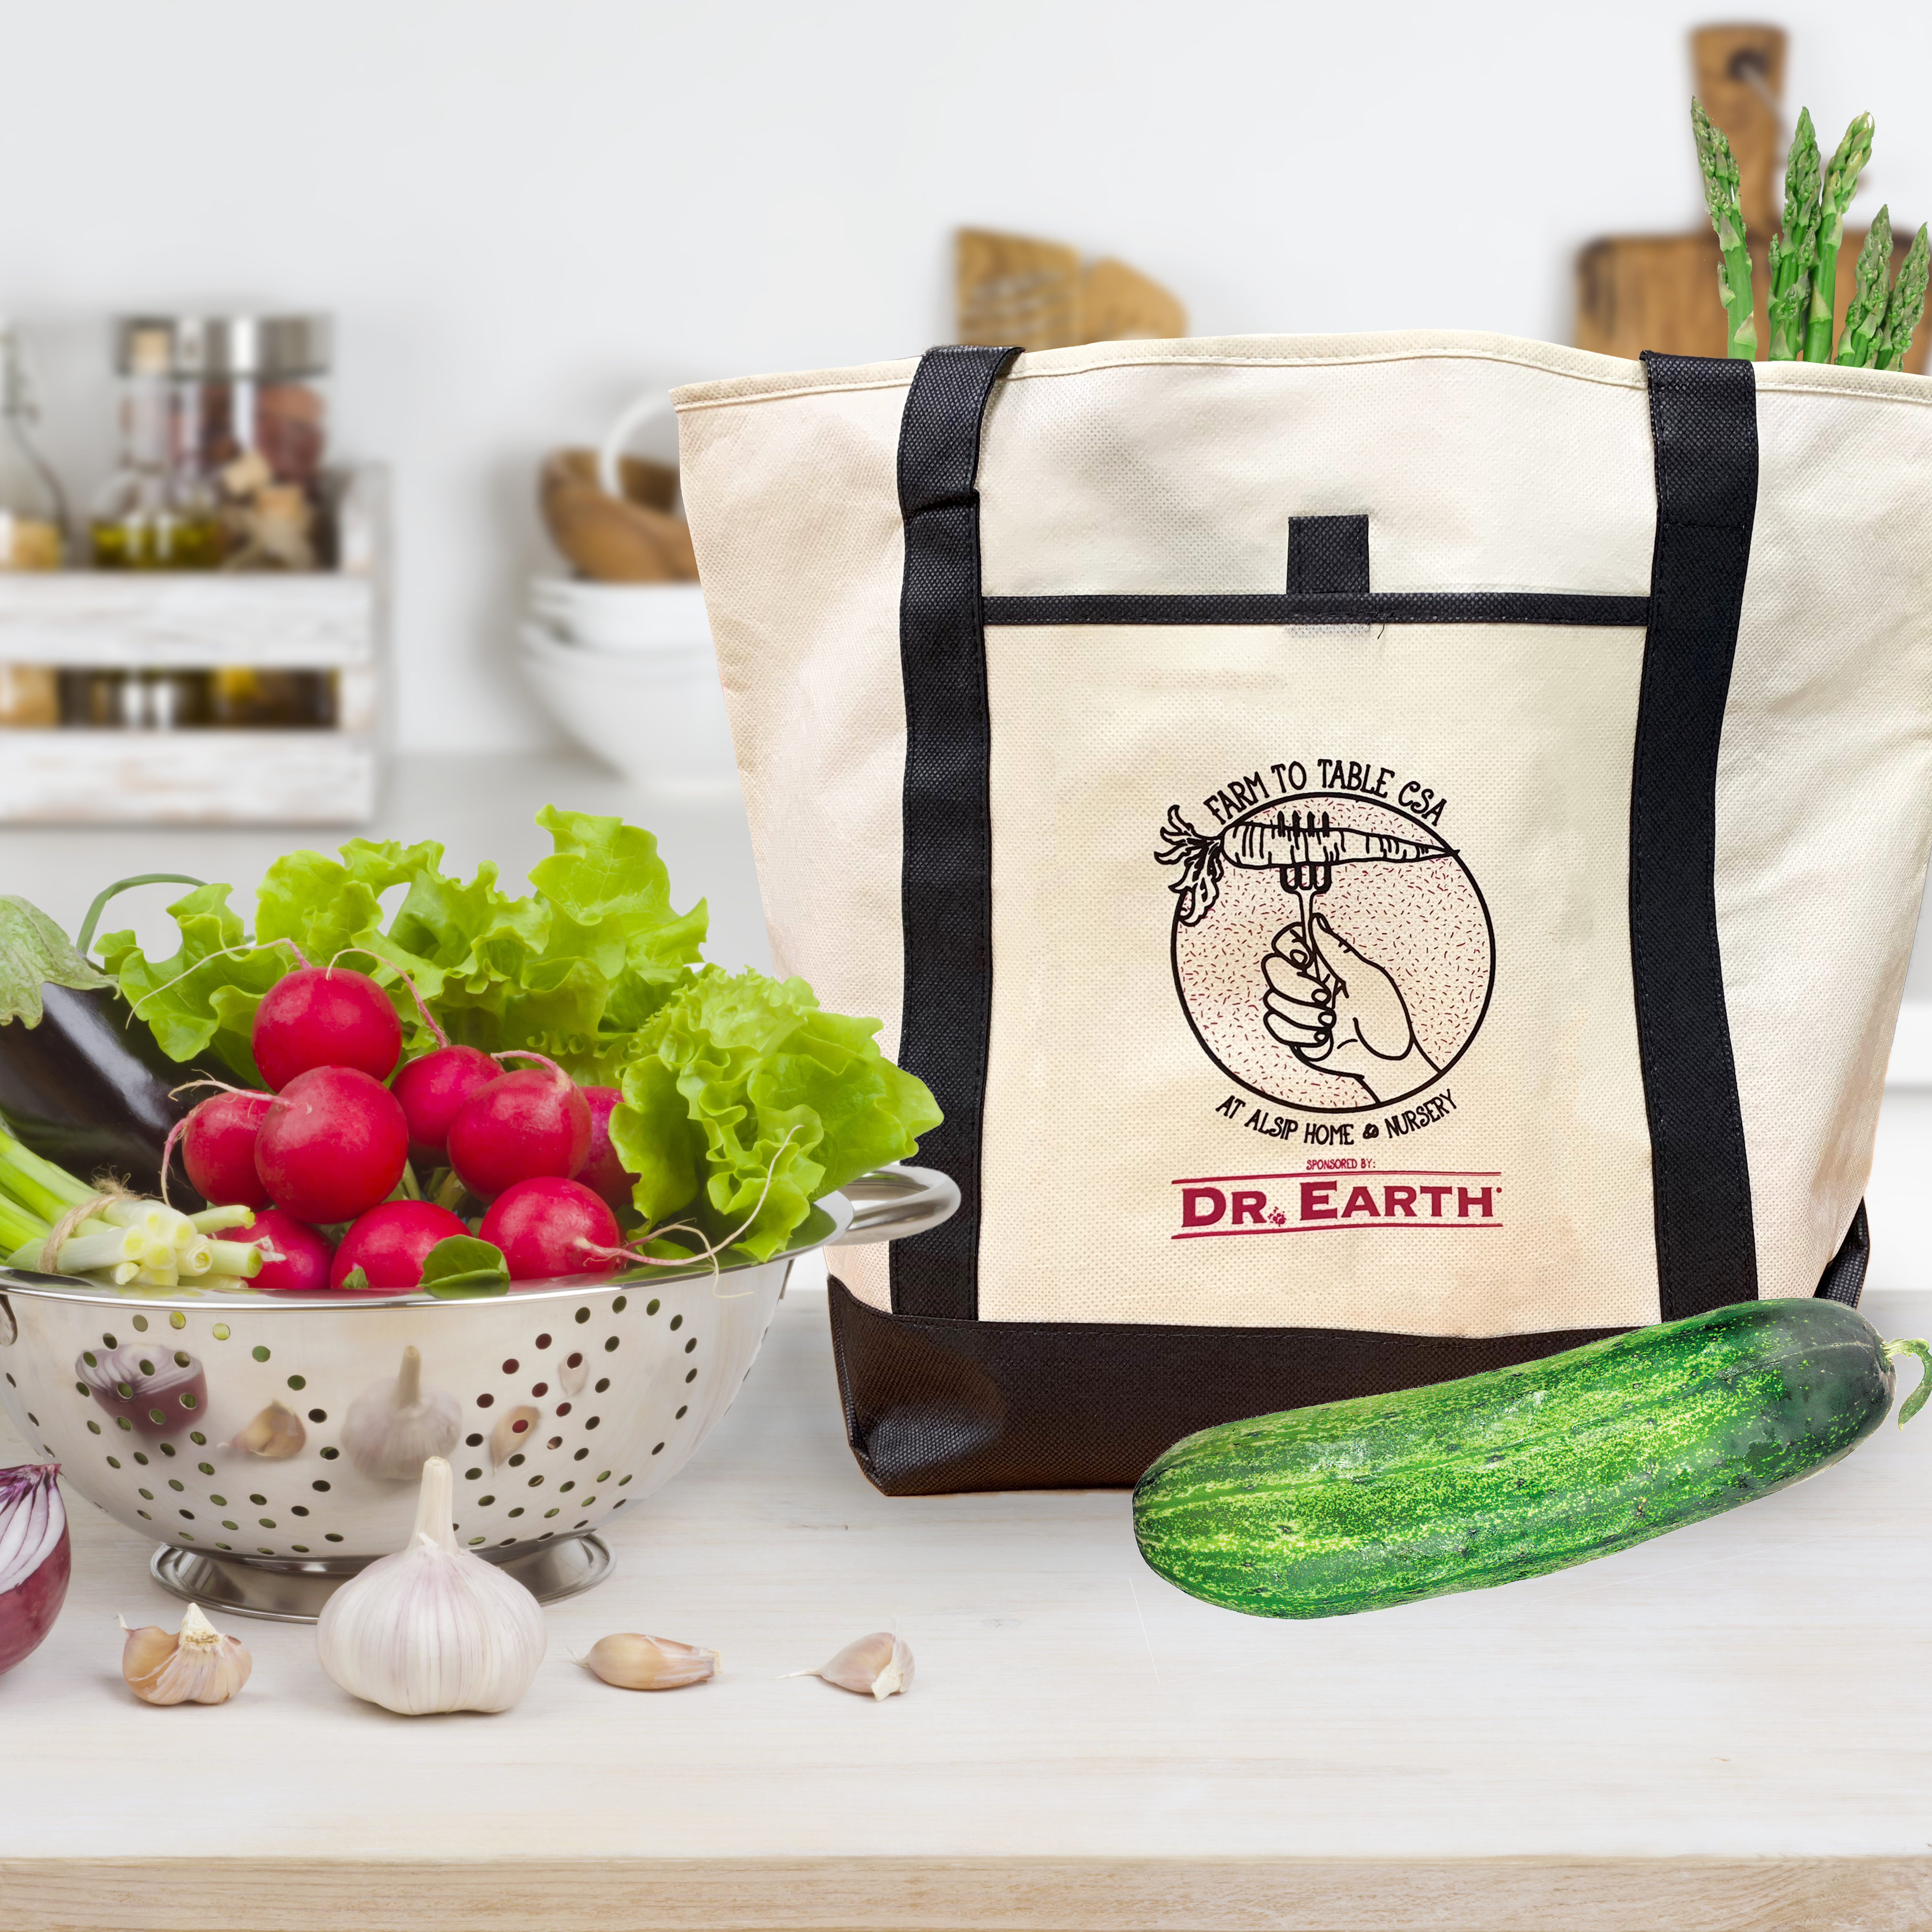 Receive one free tote bag and a single share of weekly produce every Saturday starting June through October with our Half Share CSA Subscription!